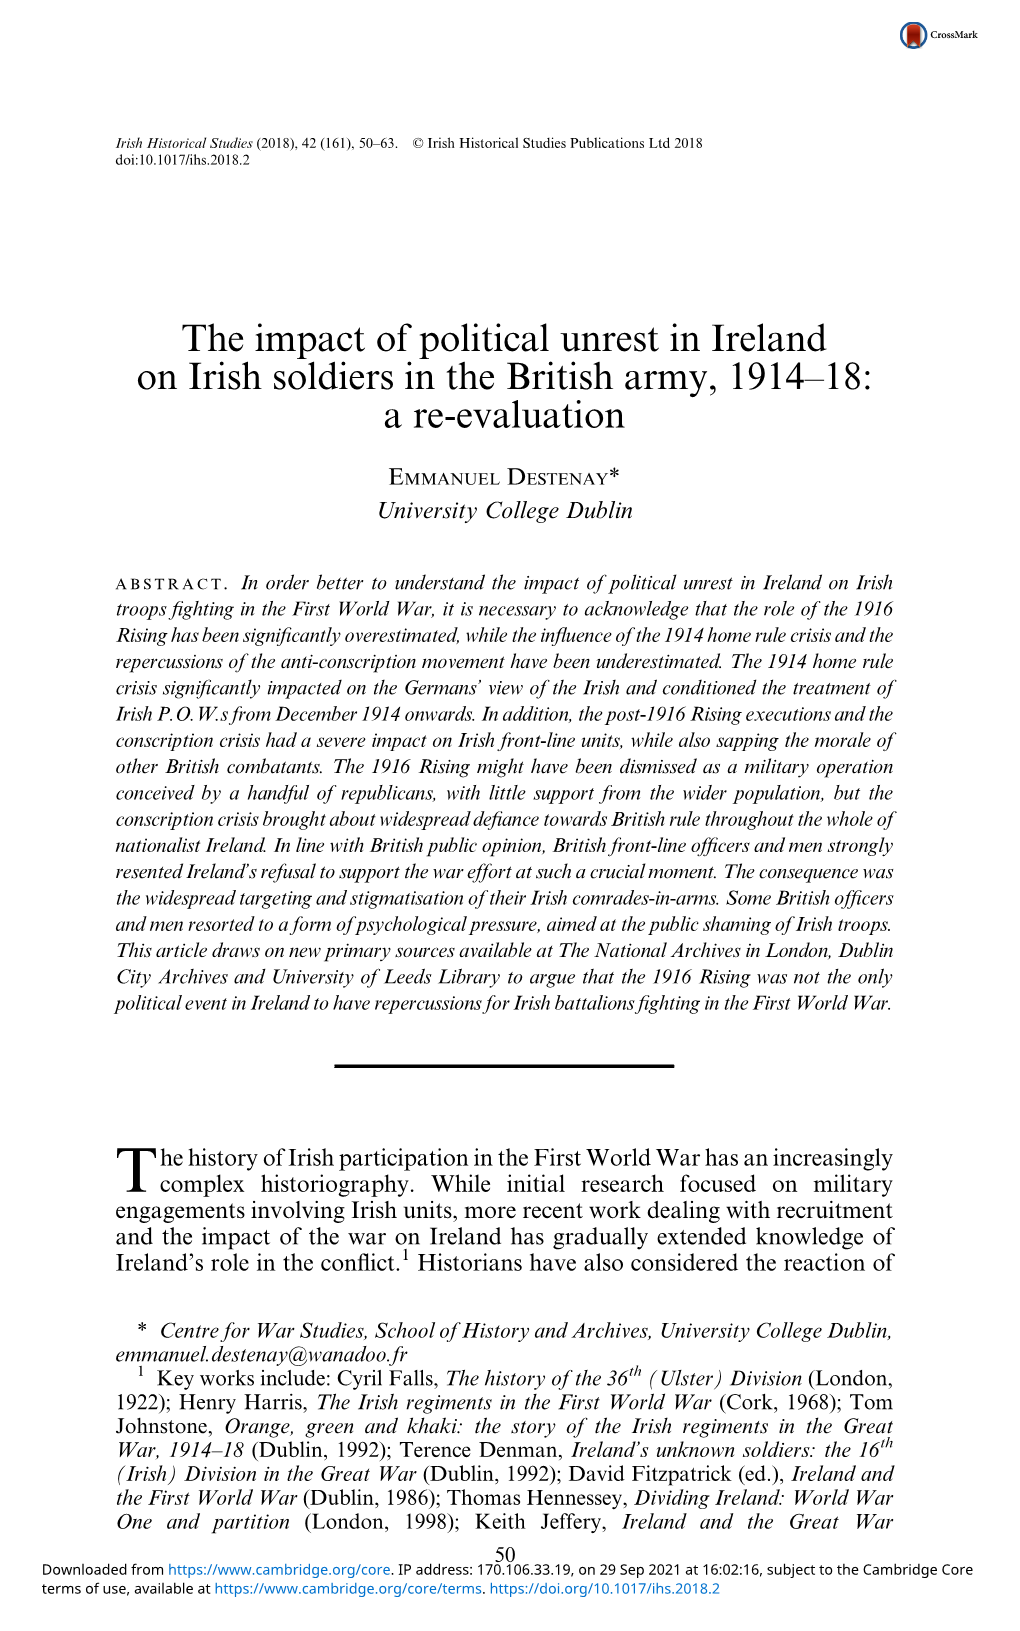 The Impact of Political Unrest in Ireland on Irish Soldiers in the British Army, 1914–18: a Re-Evaluation